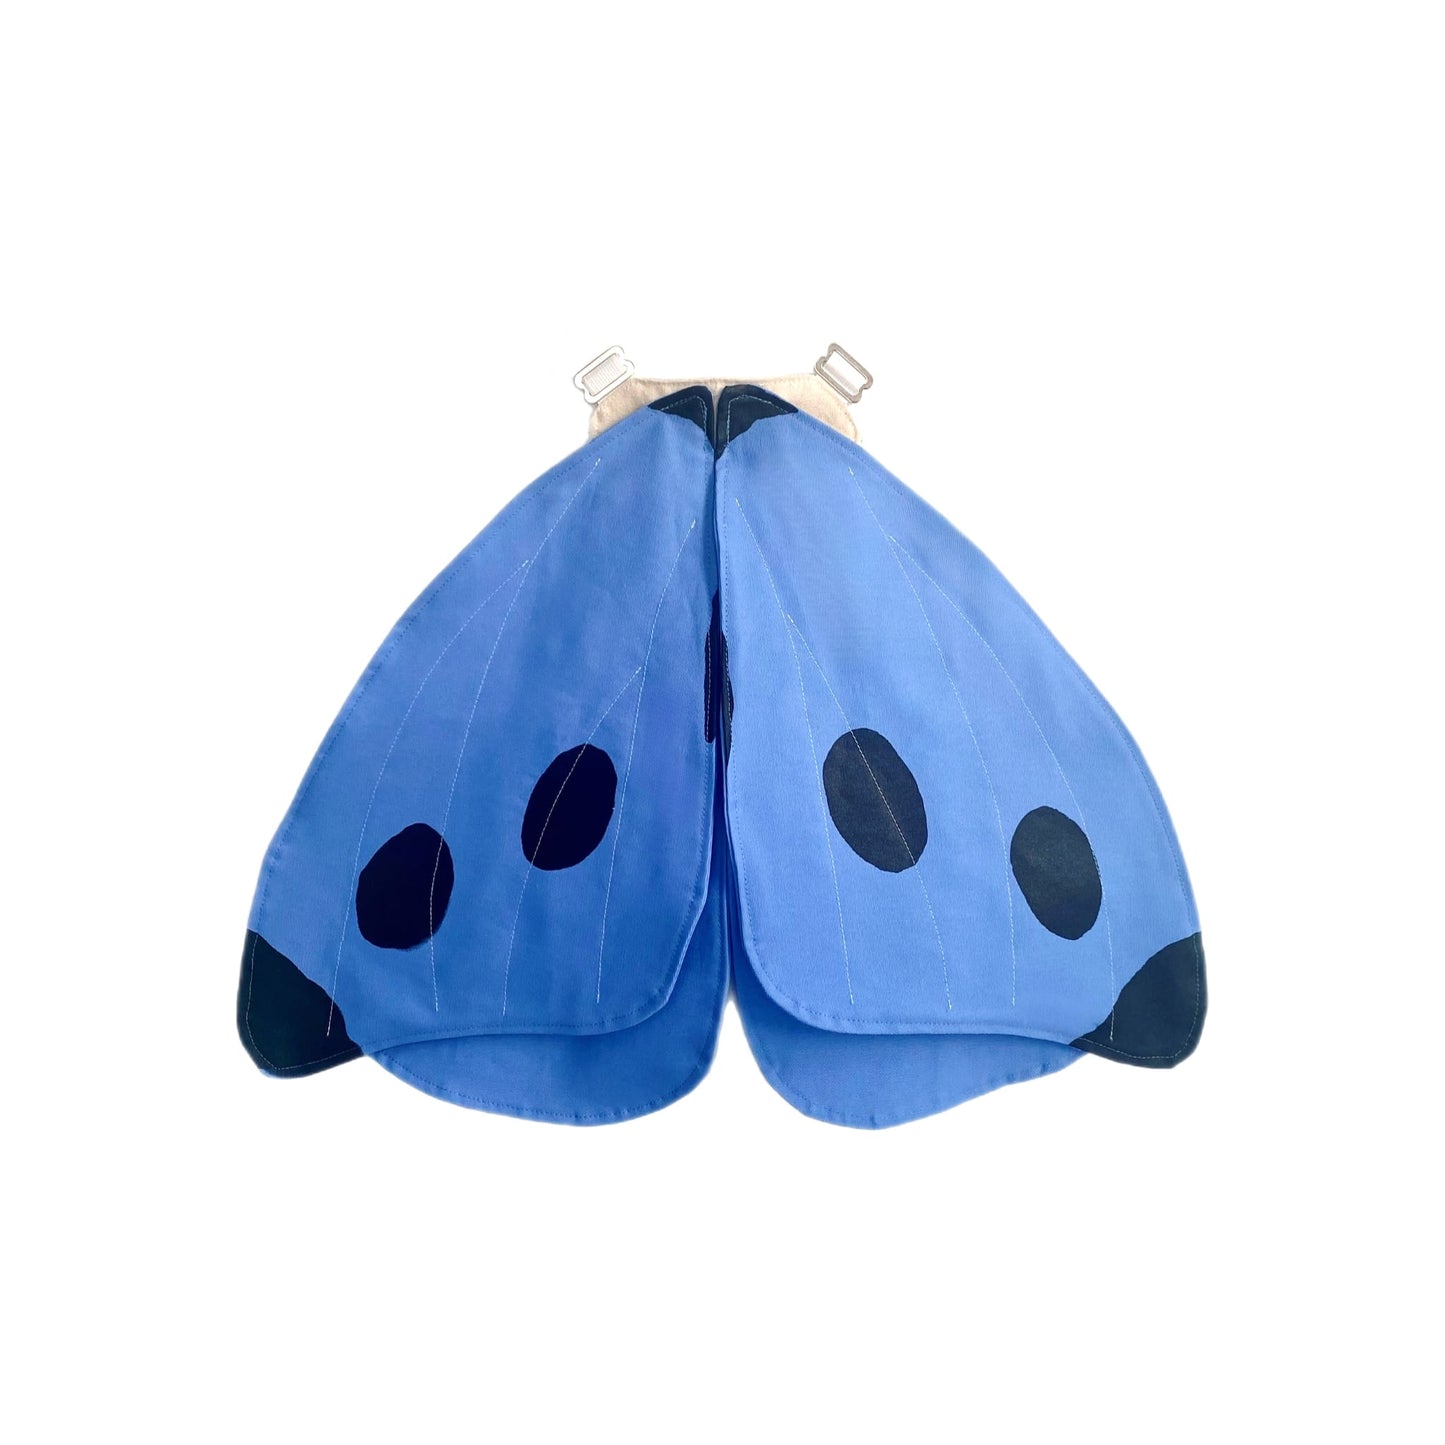 Spotted blue butterfly costume wings for kids.